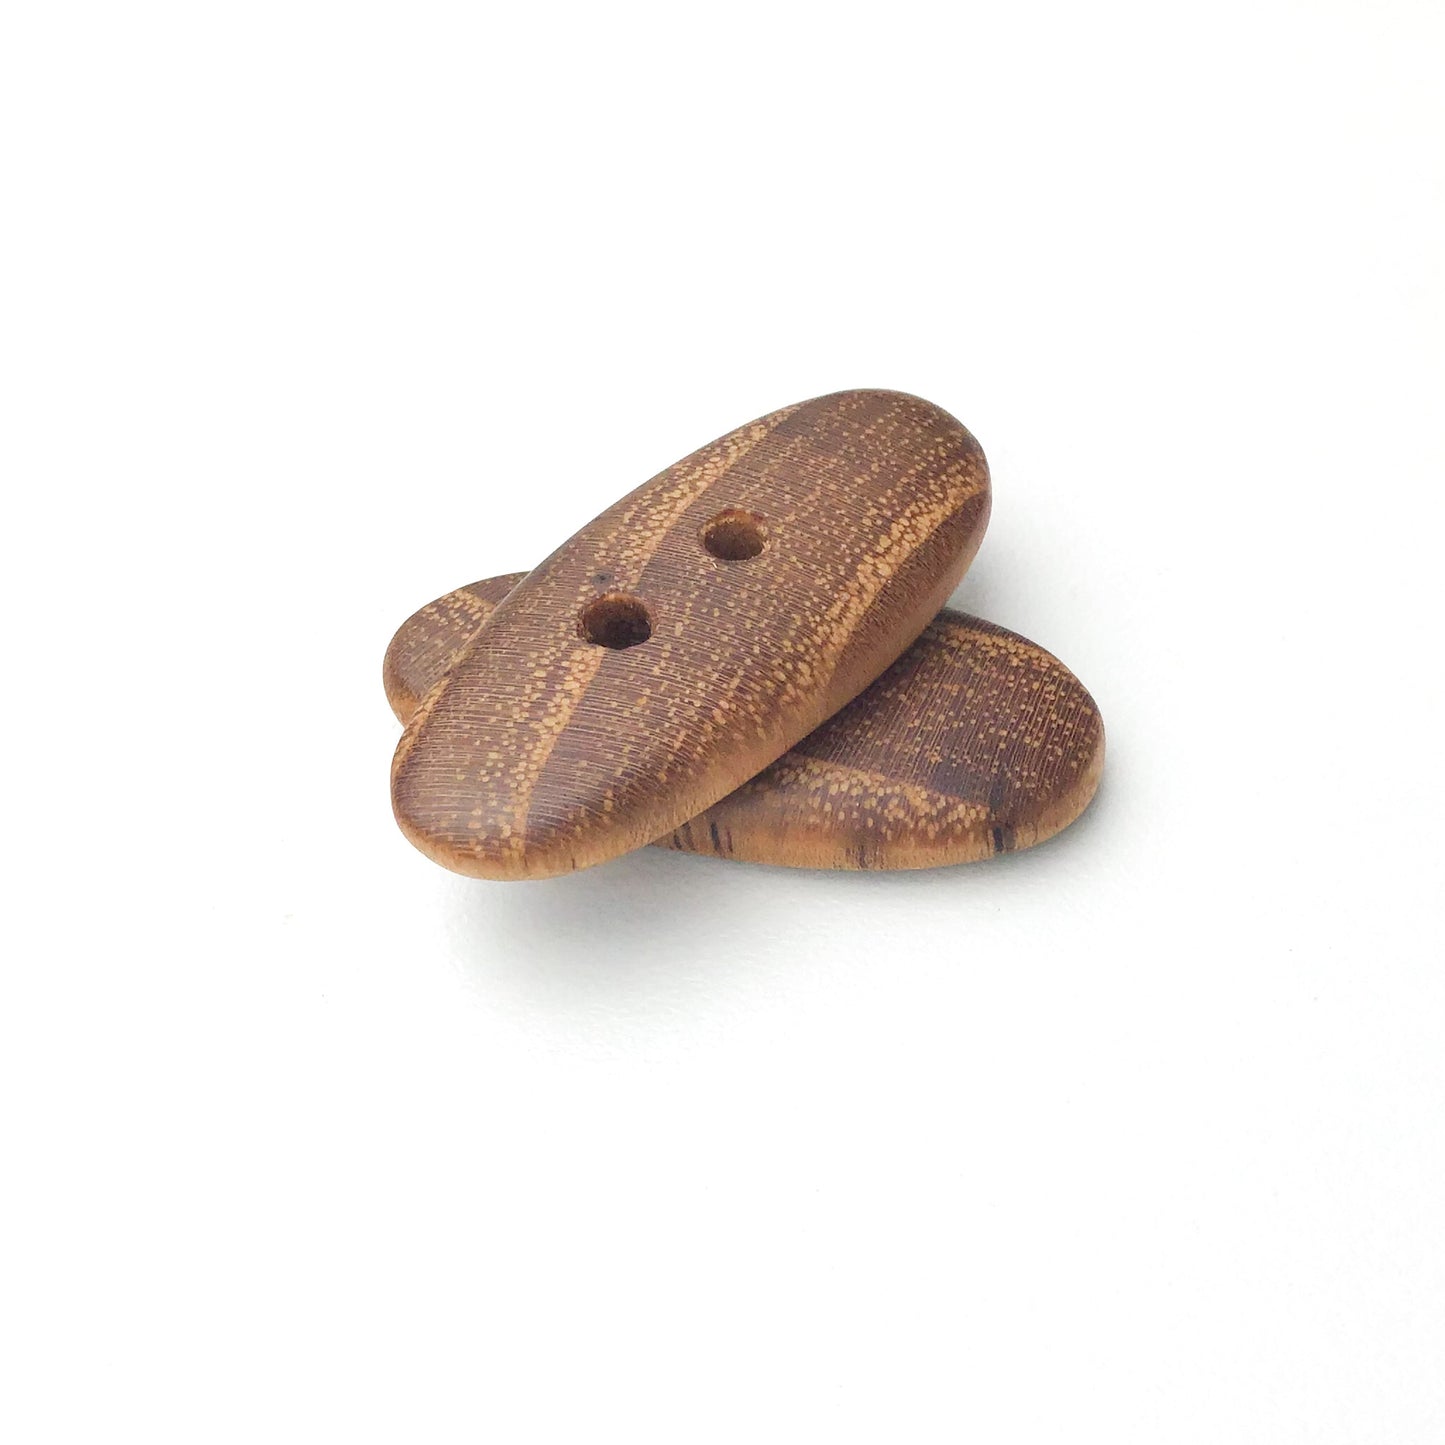 Black Locust Wood Buttons - Wooden Toggle Buttons - 5/8" X 1 7/16" - 2 Pack